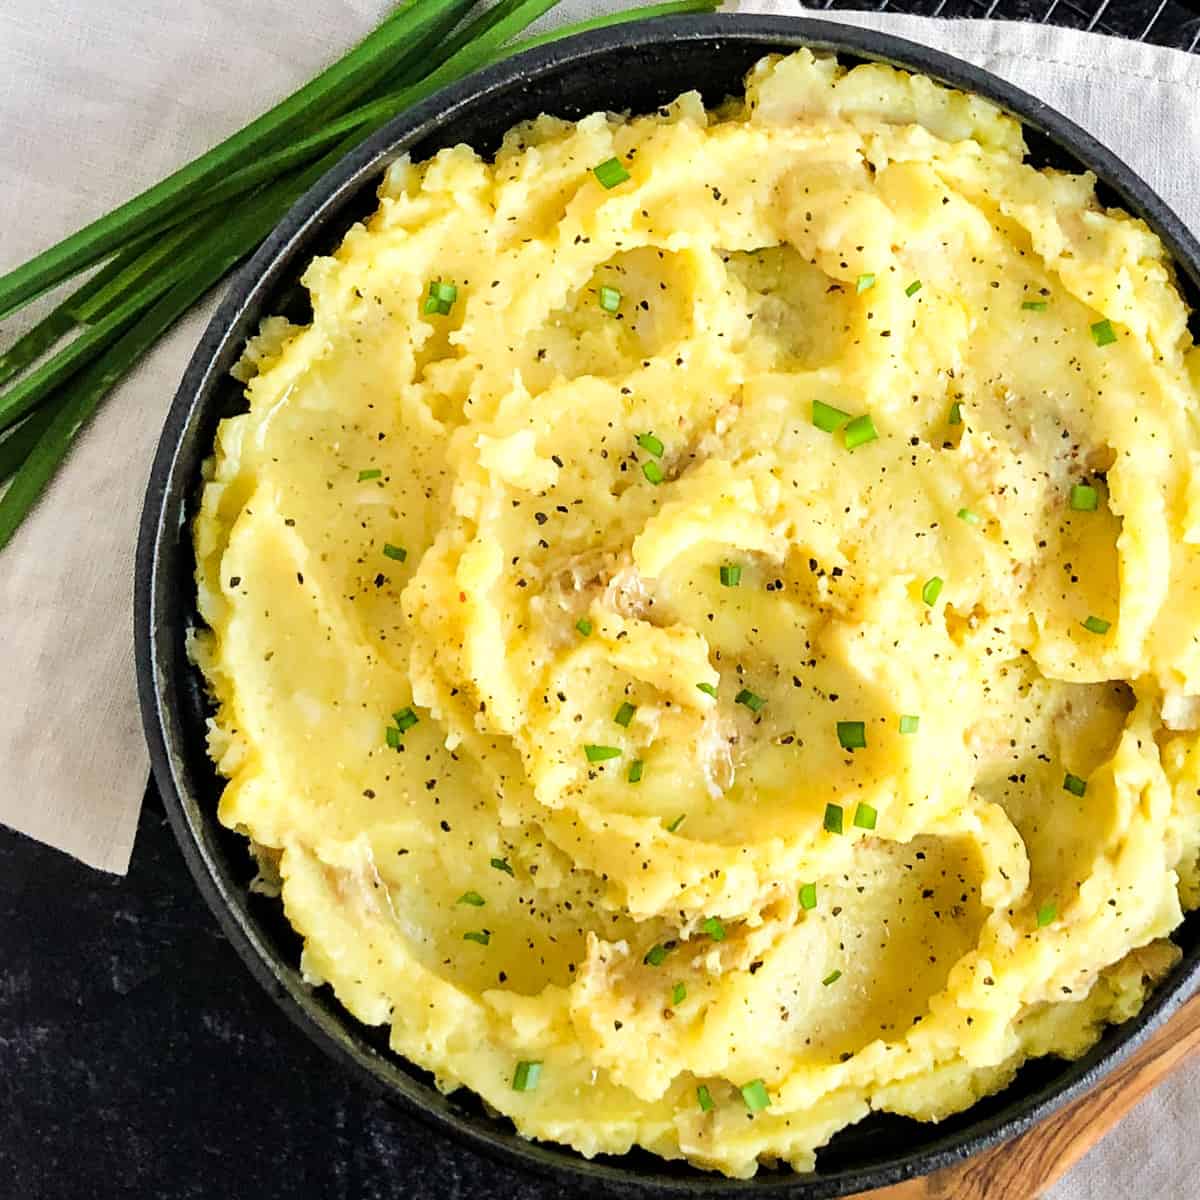 Overhead shot of Parsnip Mashed Potatoes in a black bowl garnished with fresh chives.